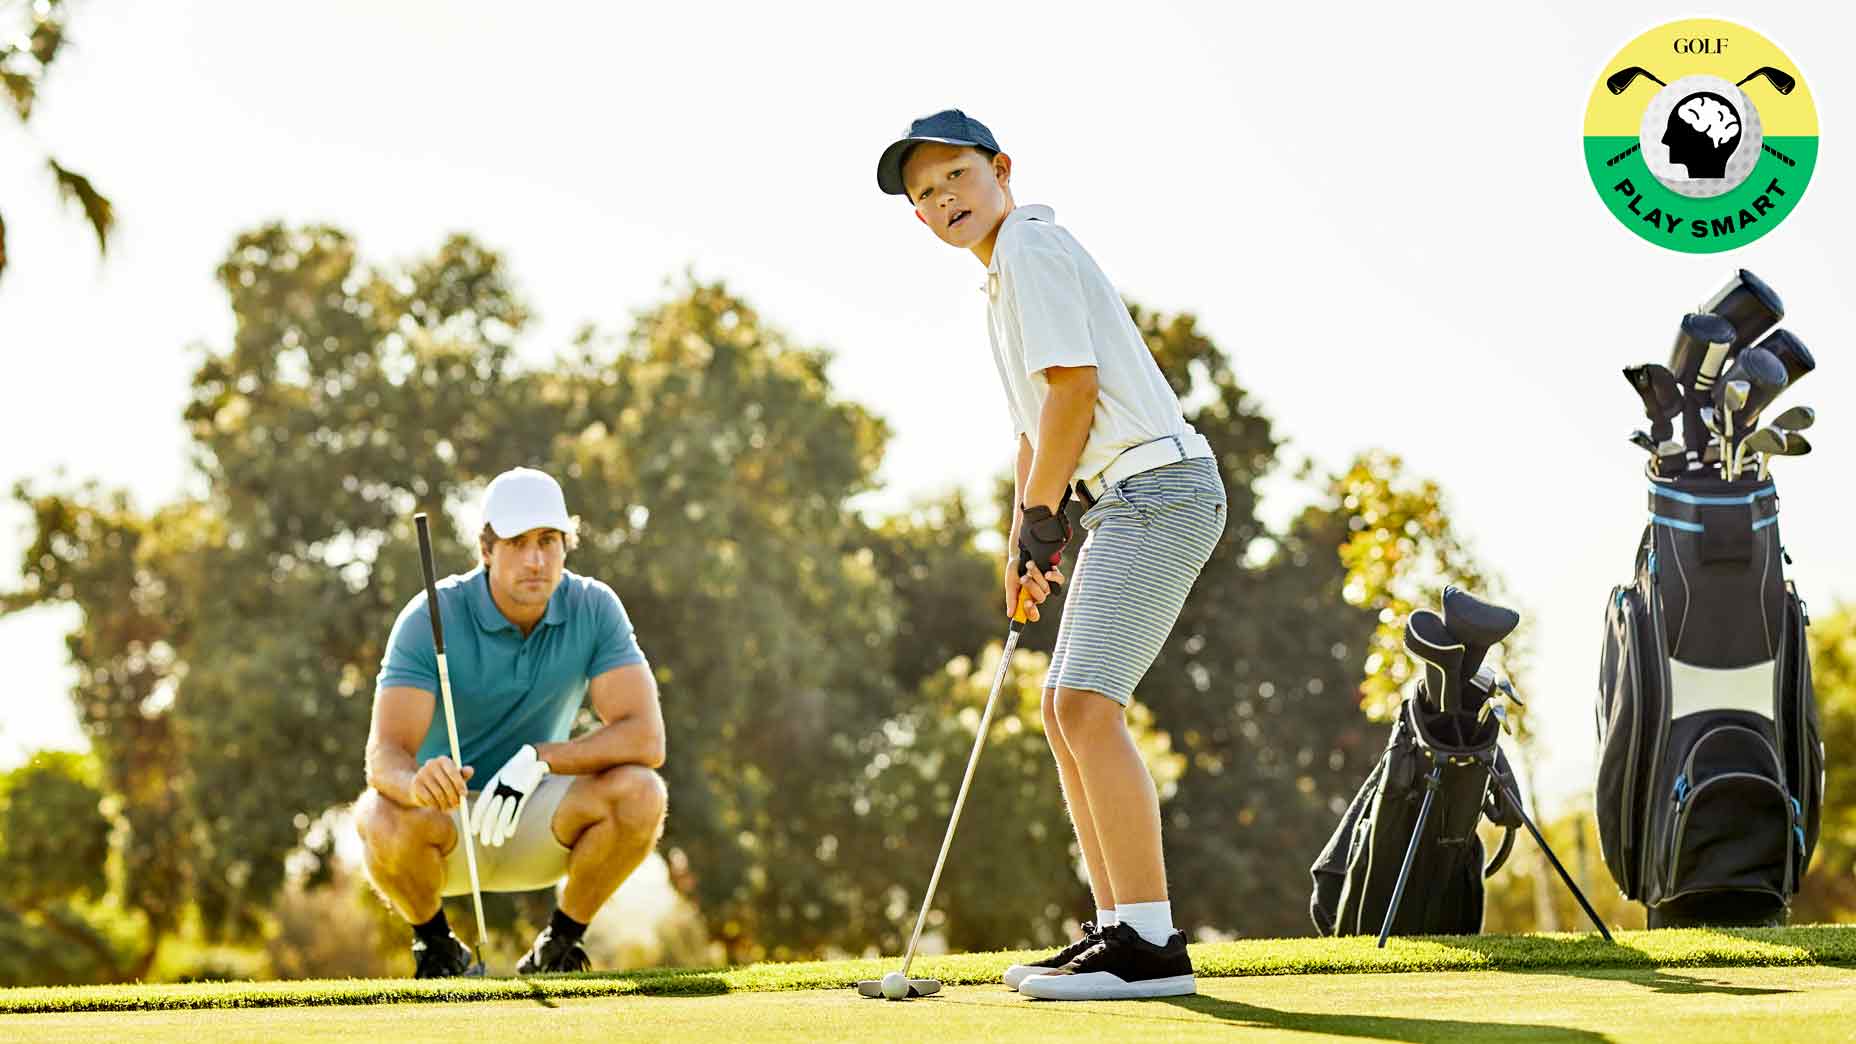 If you're a parent trying to get a kid into the game of golf, these youth golf lessons are a great place to start developing their skills